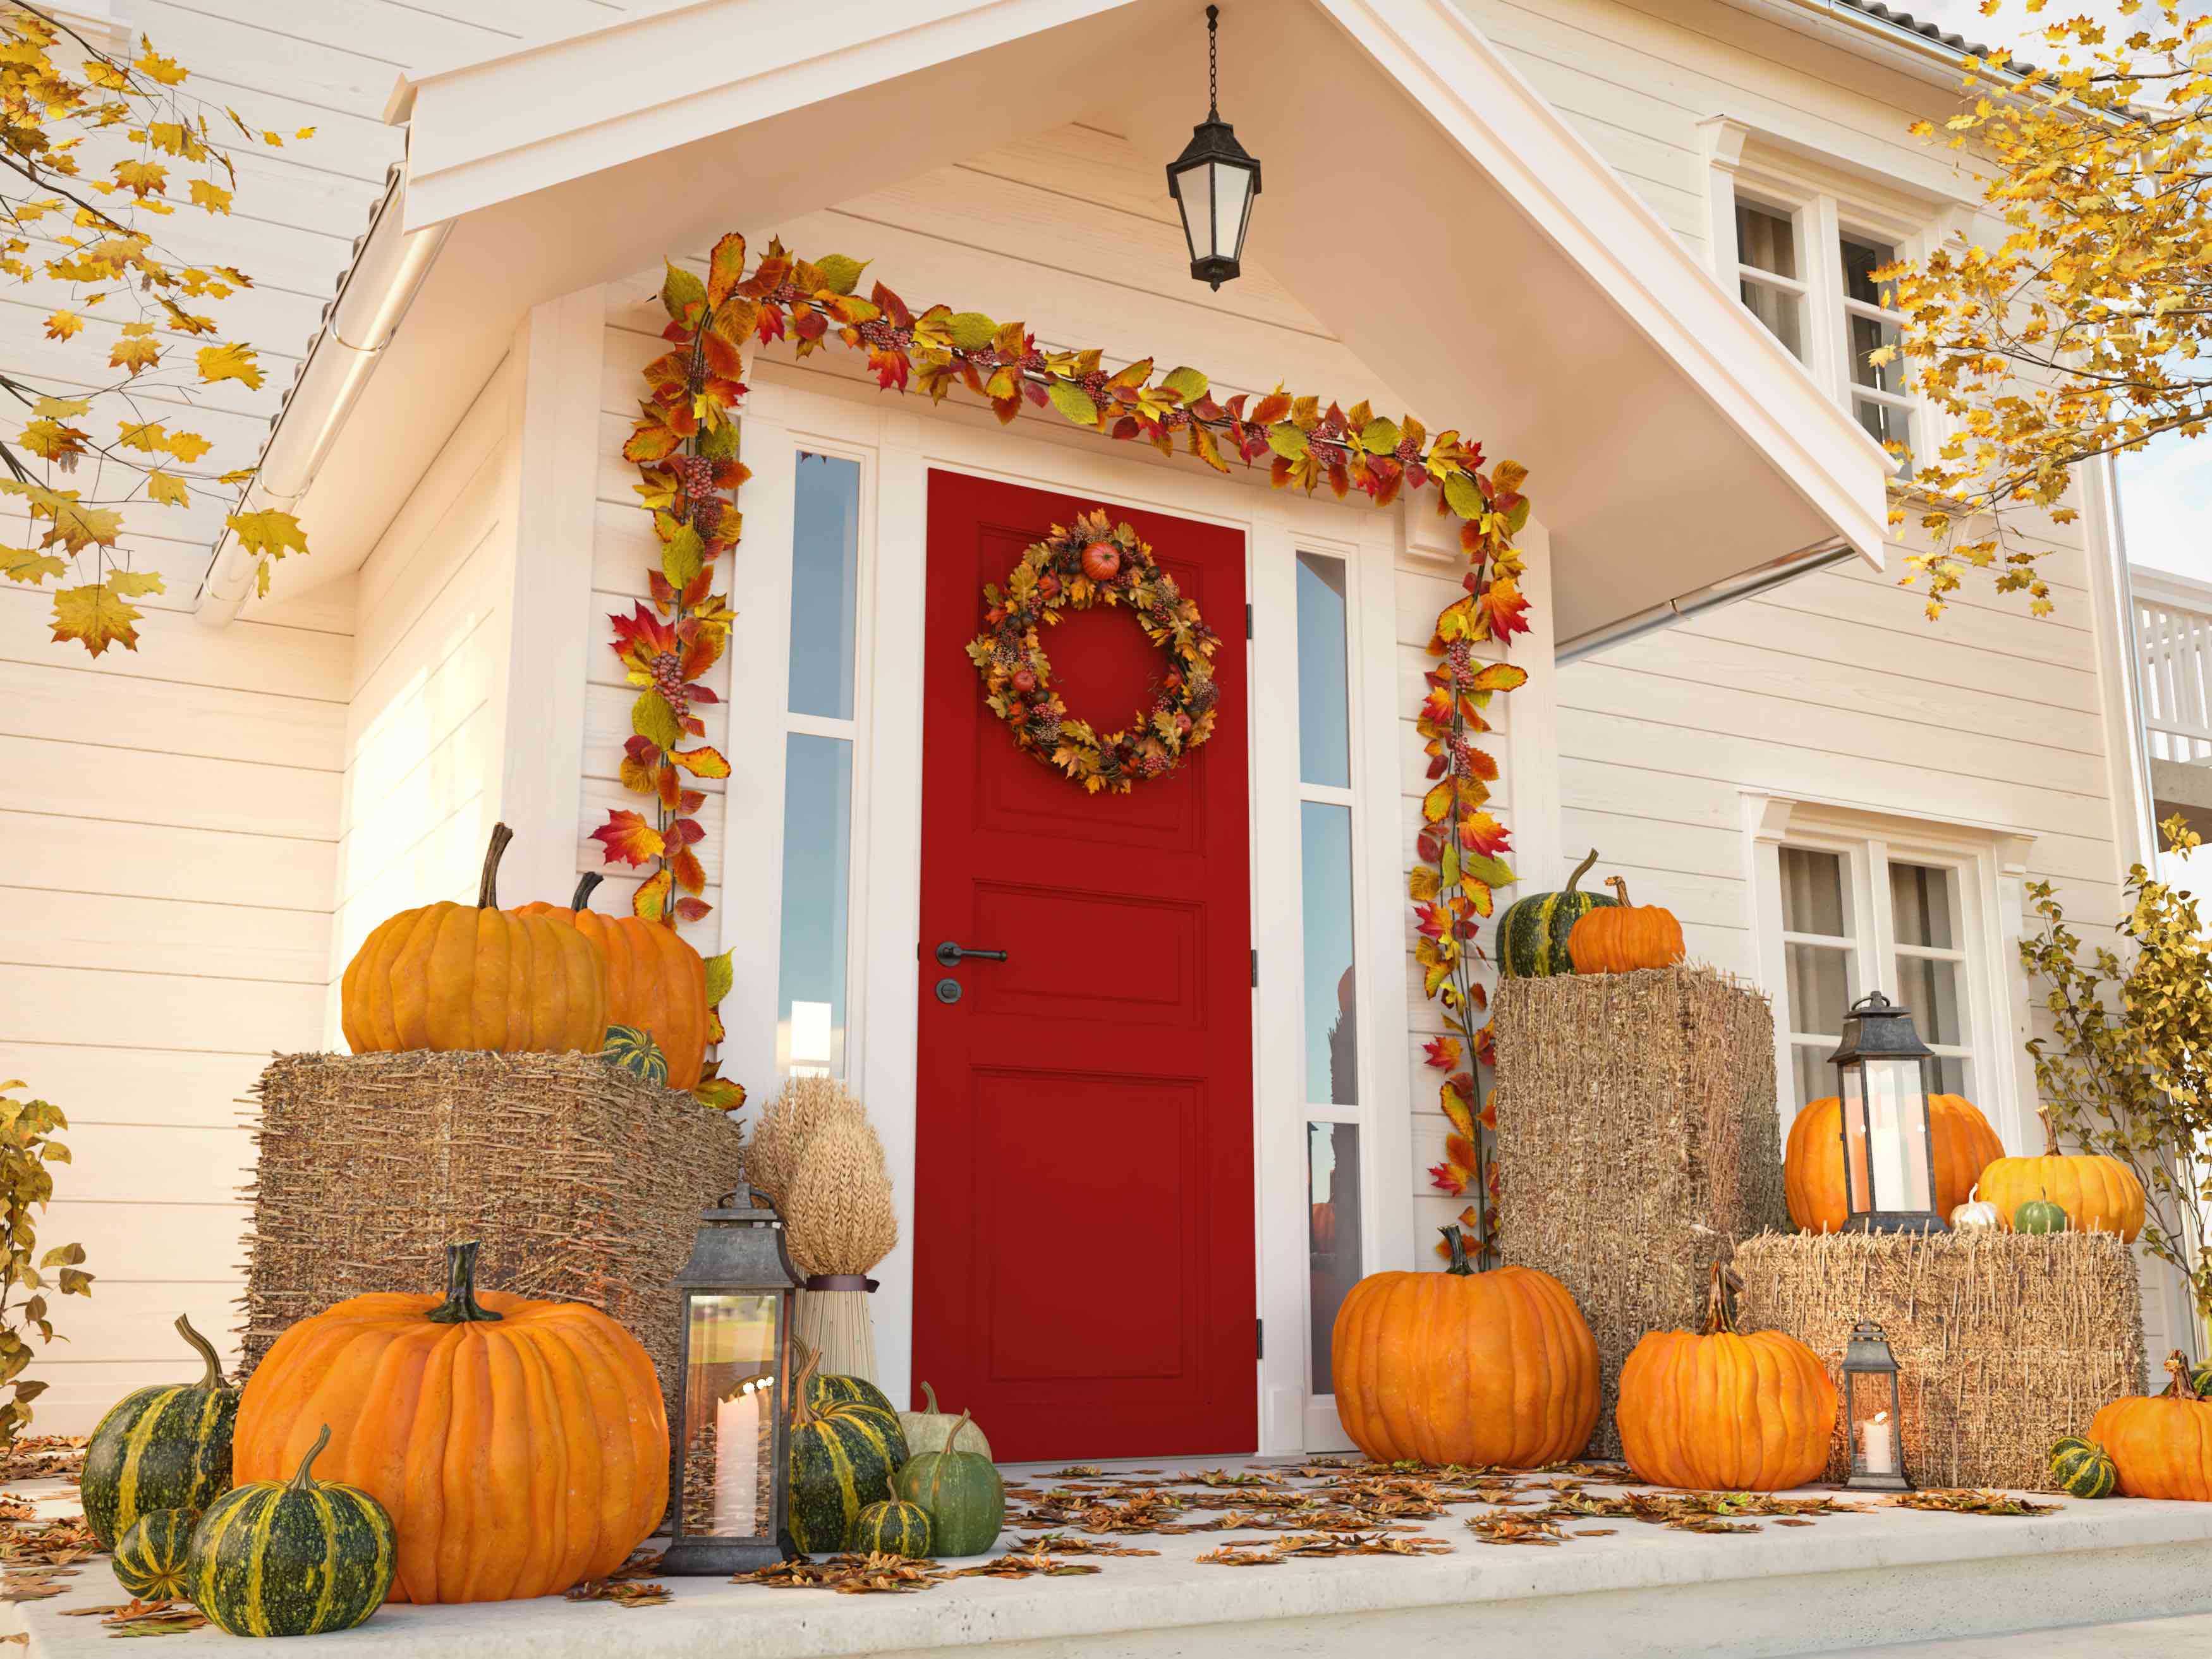 Marketing Your Home During the Halloween Season Doesn't Need to Be Scary